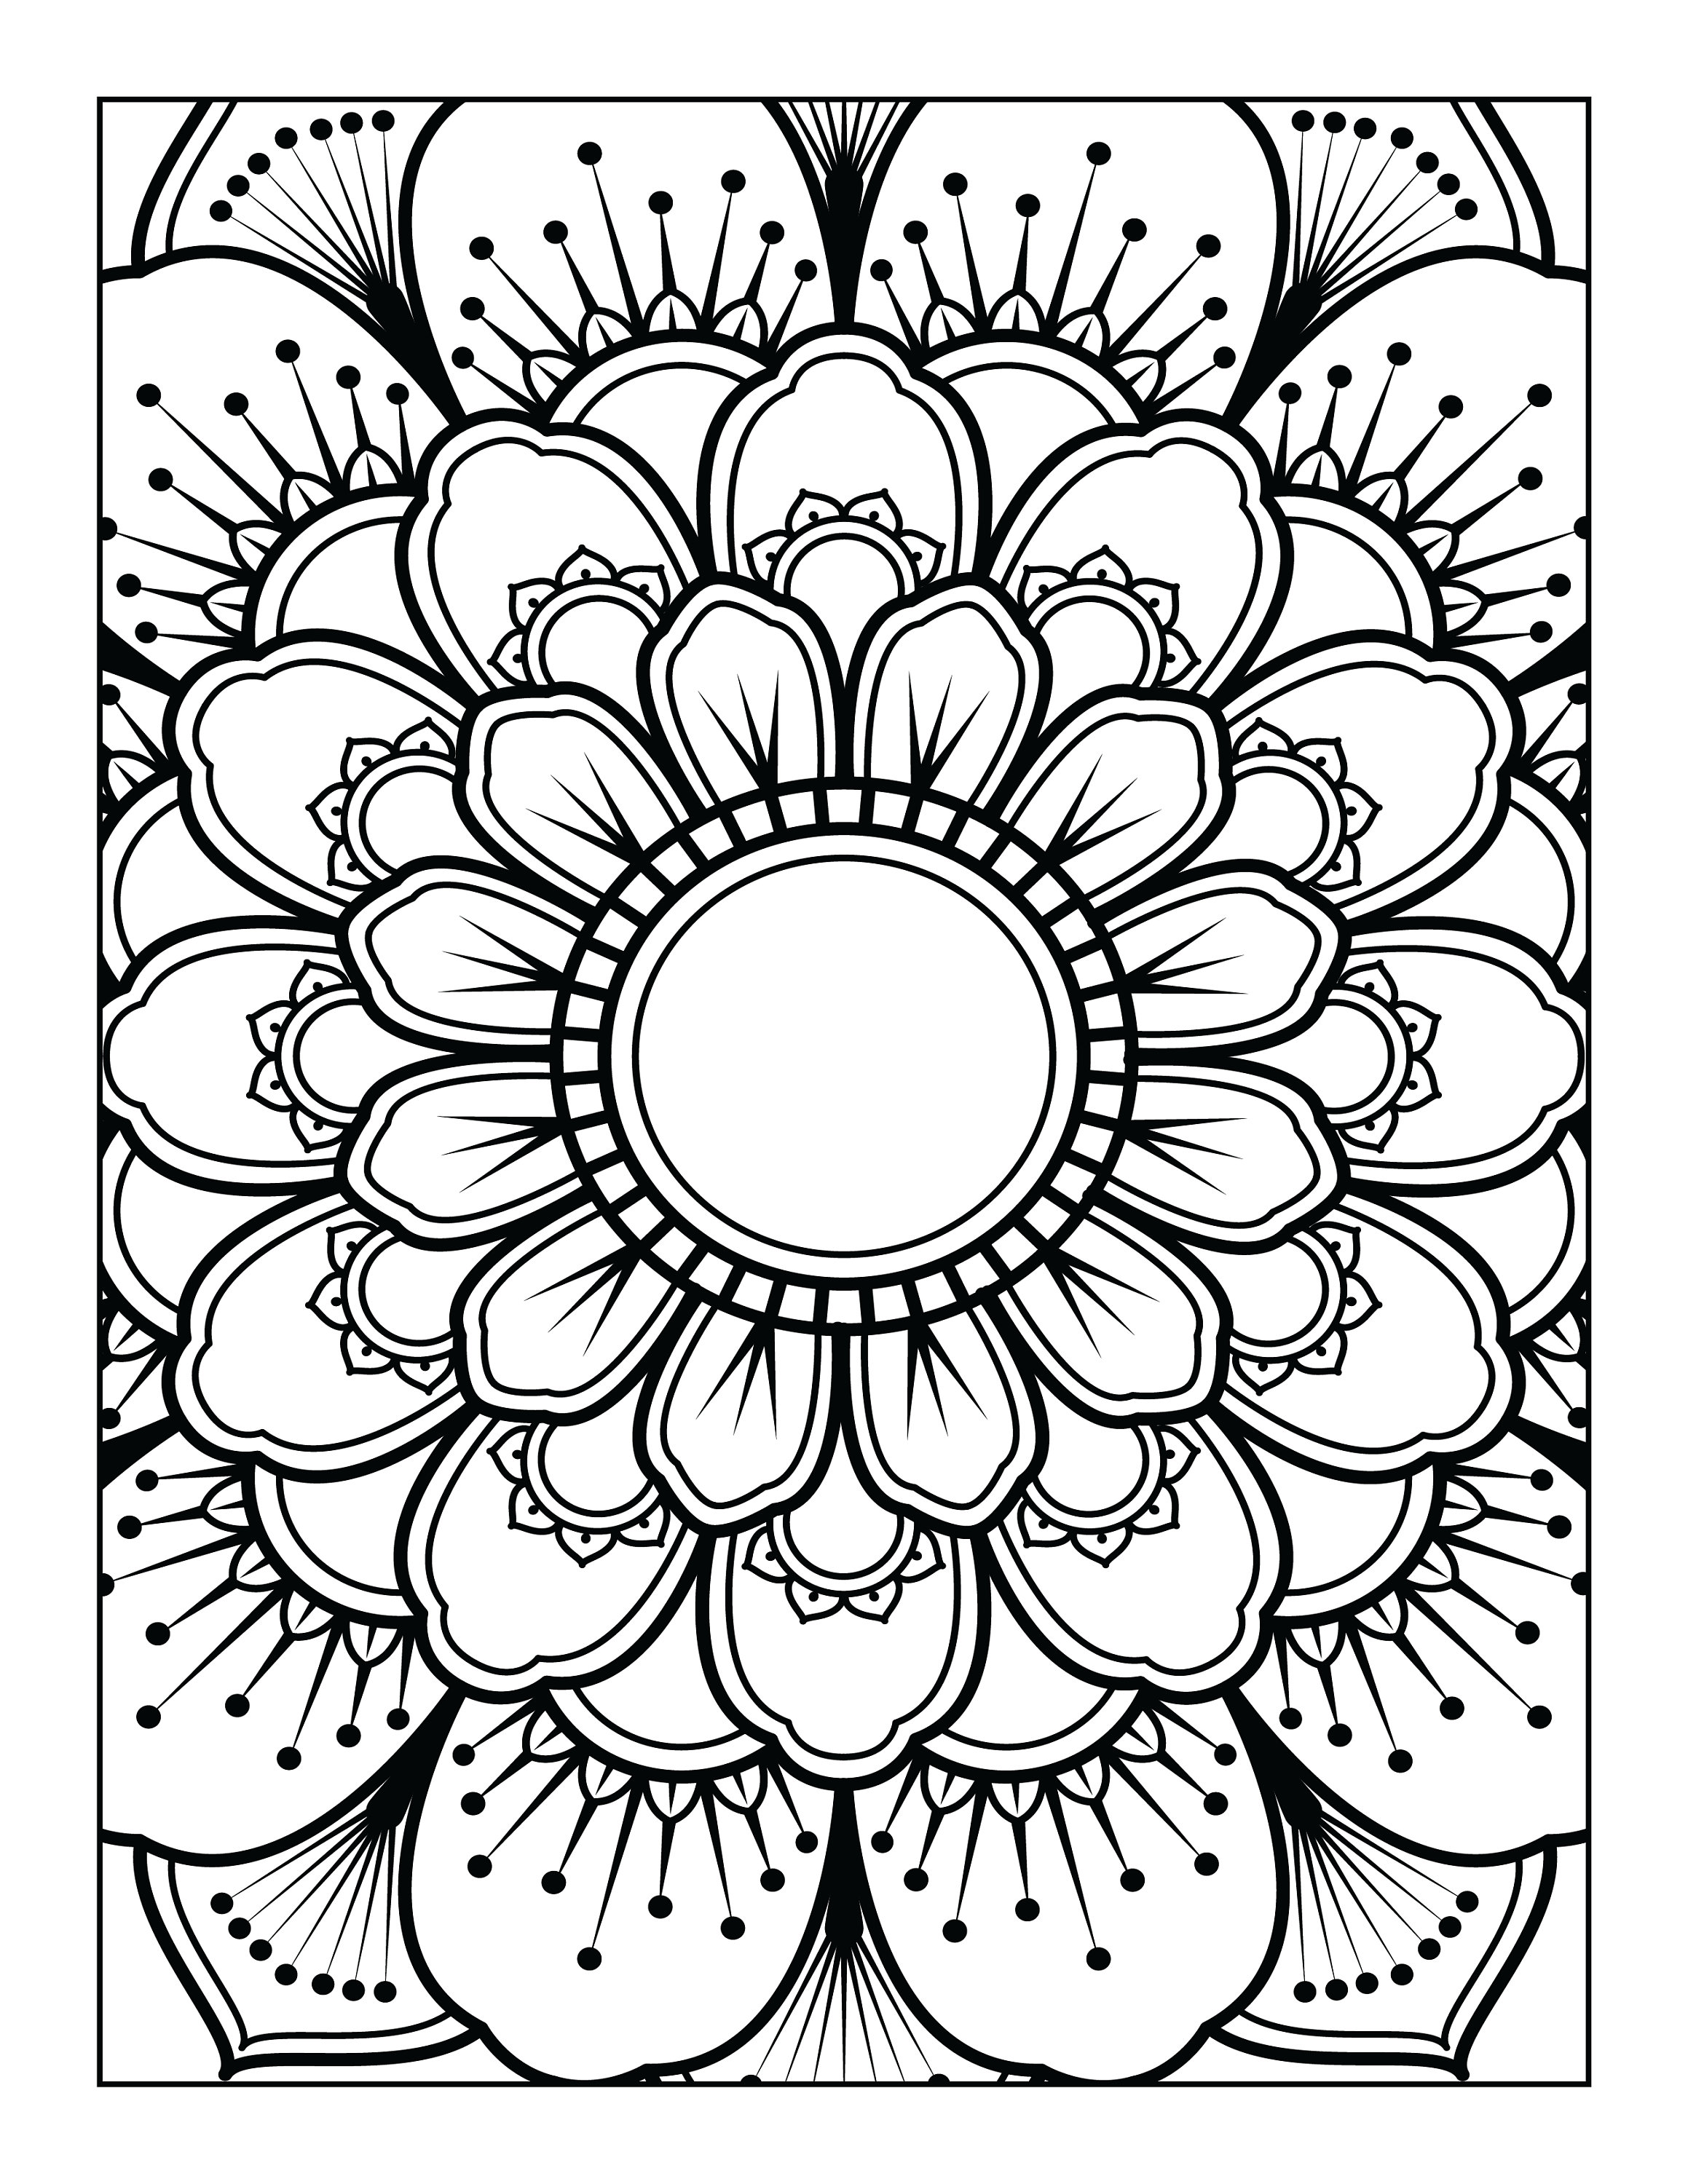 5 Printable Mandala adult Coloring Pages Floral Easy - Etsy.de